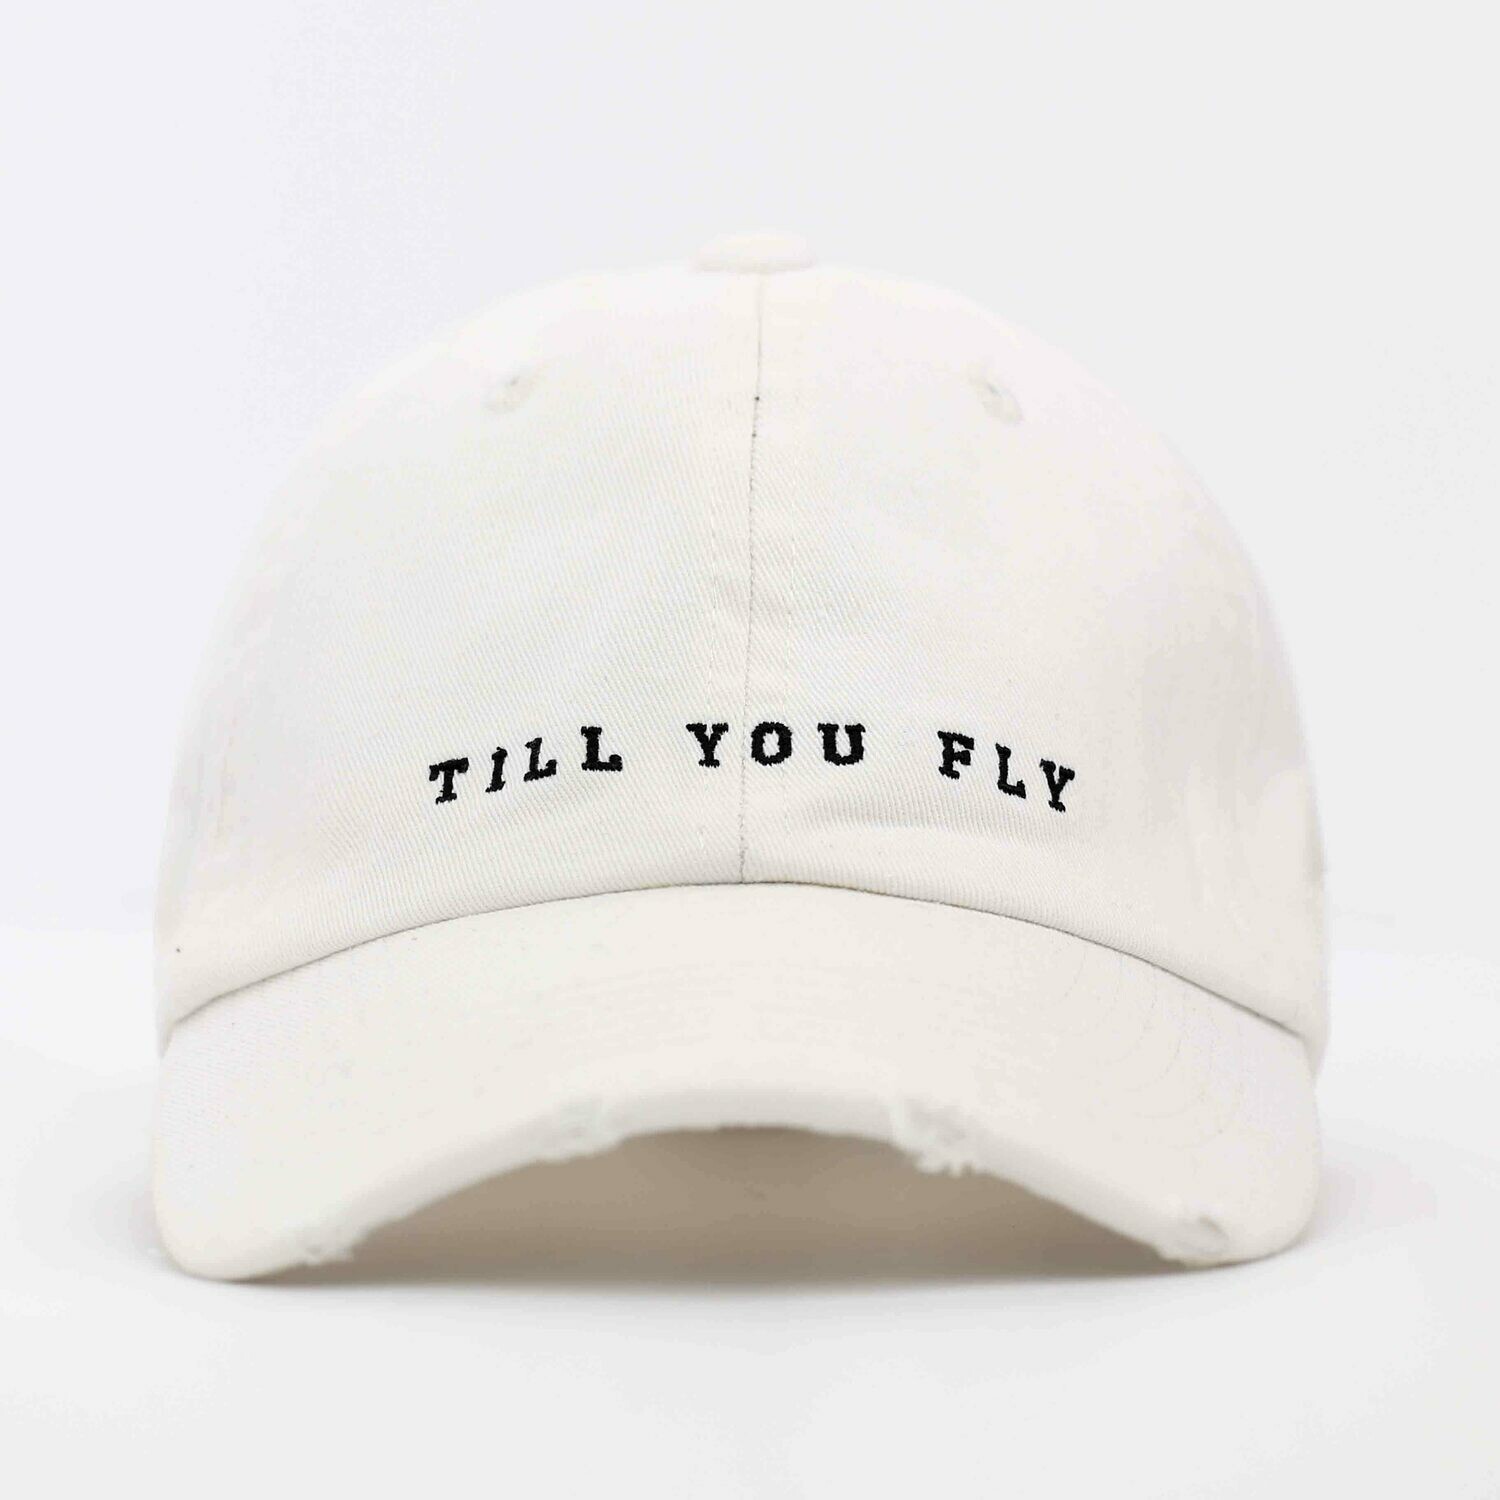 "Till You Fly" is the way casual headwear